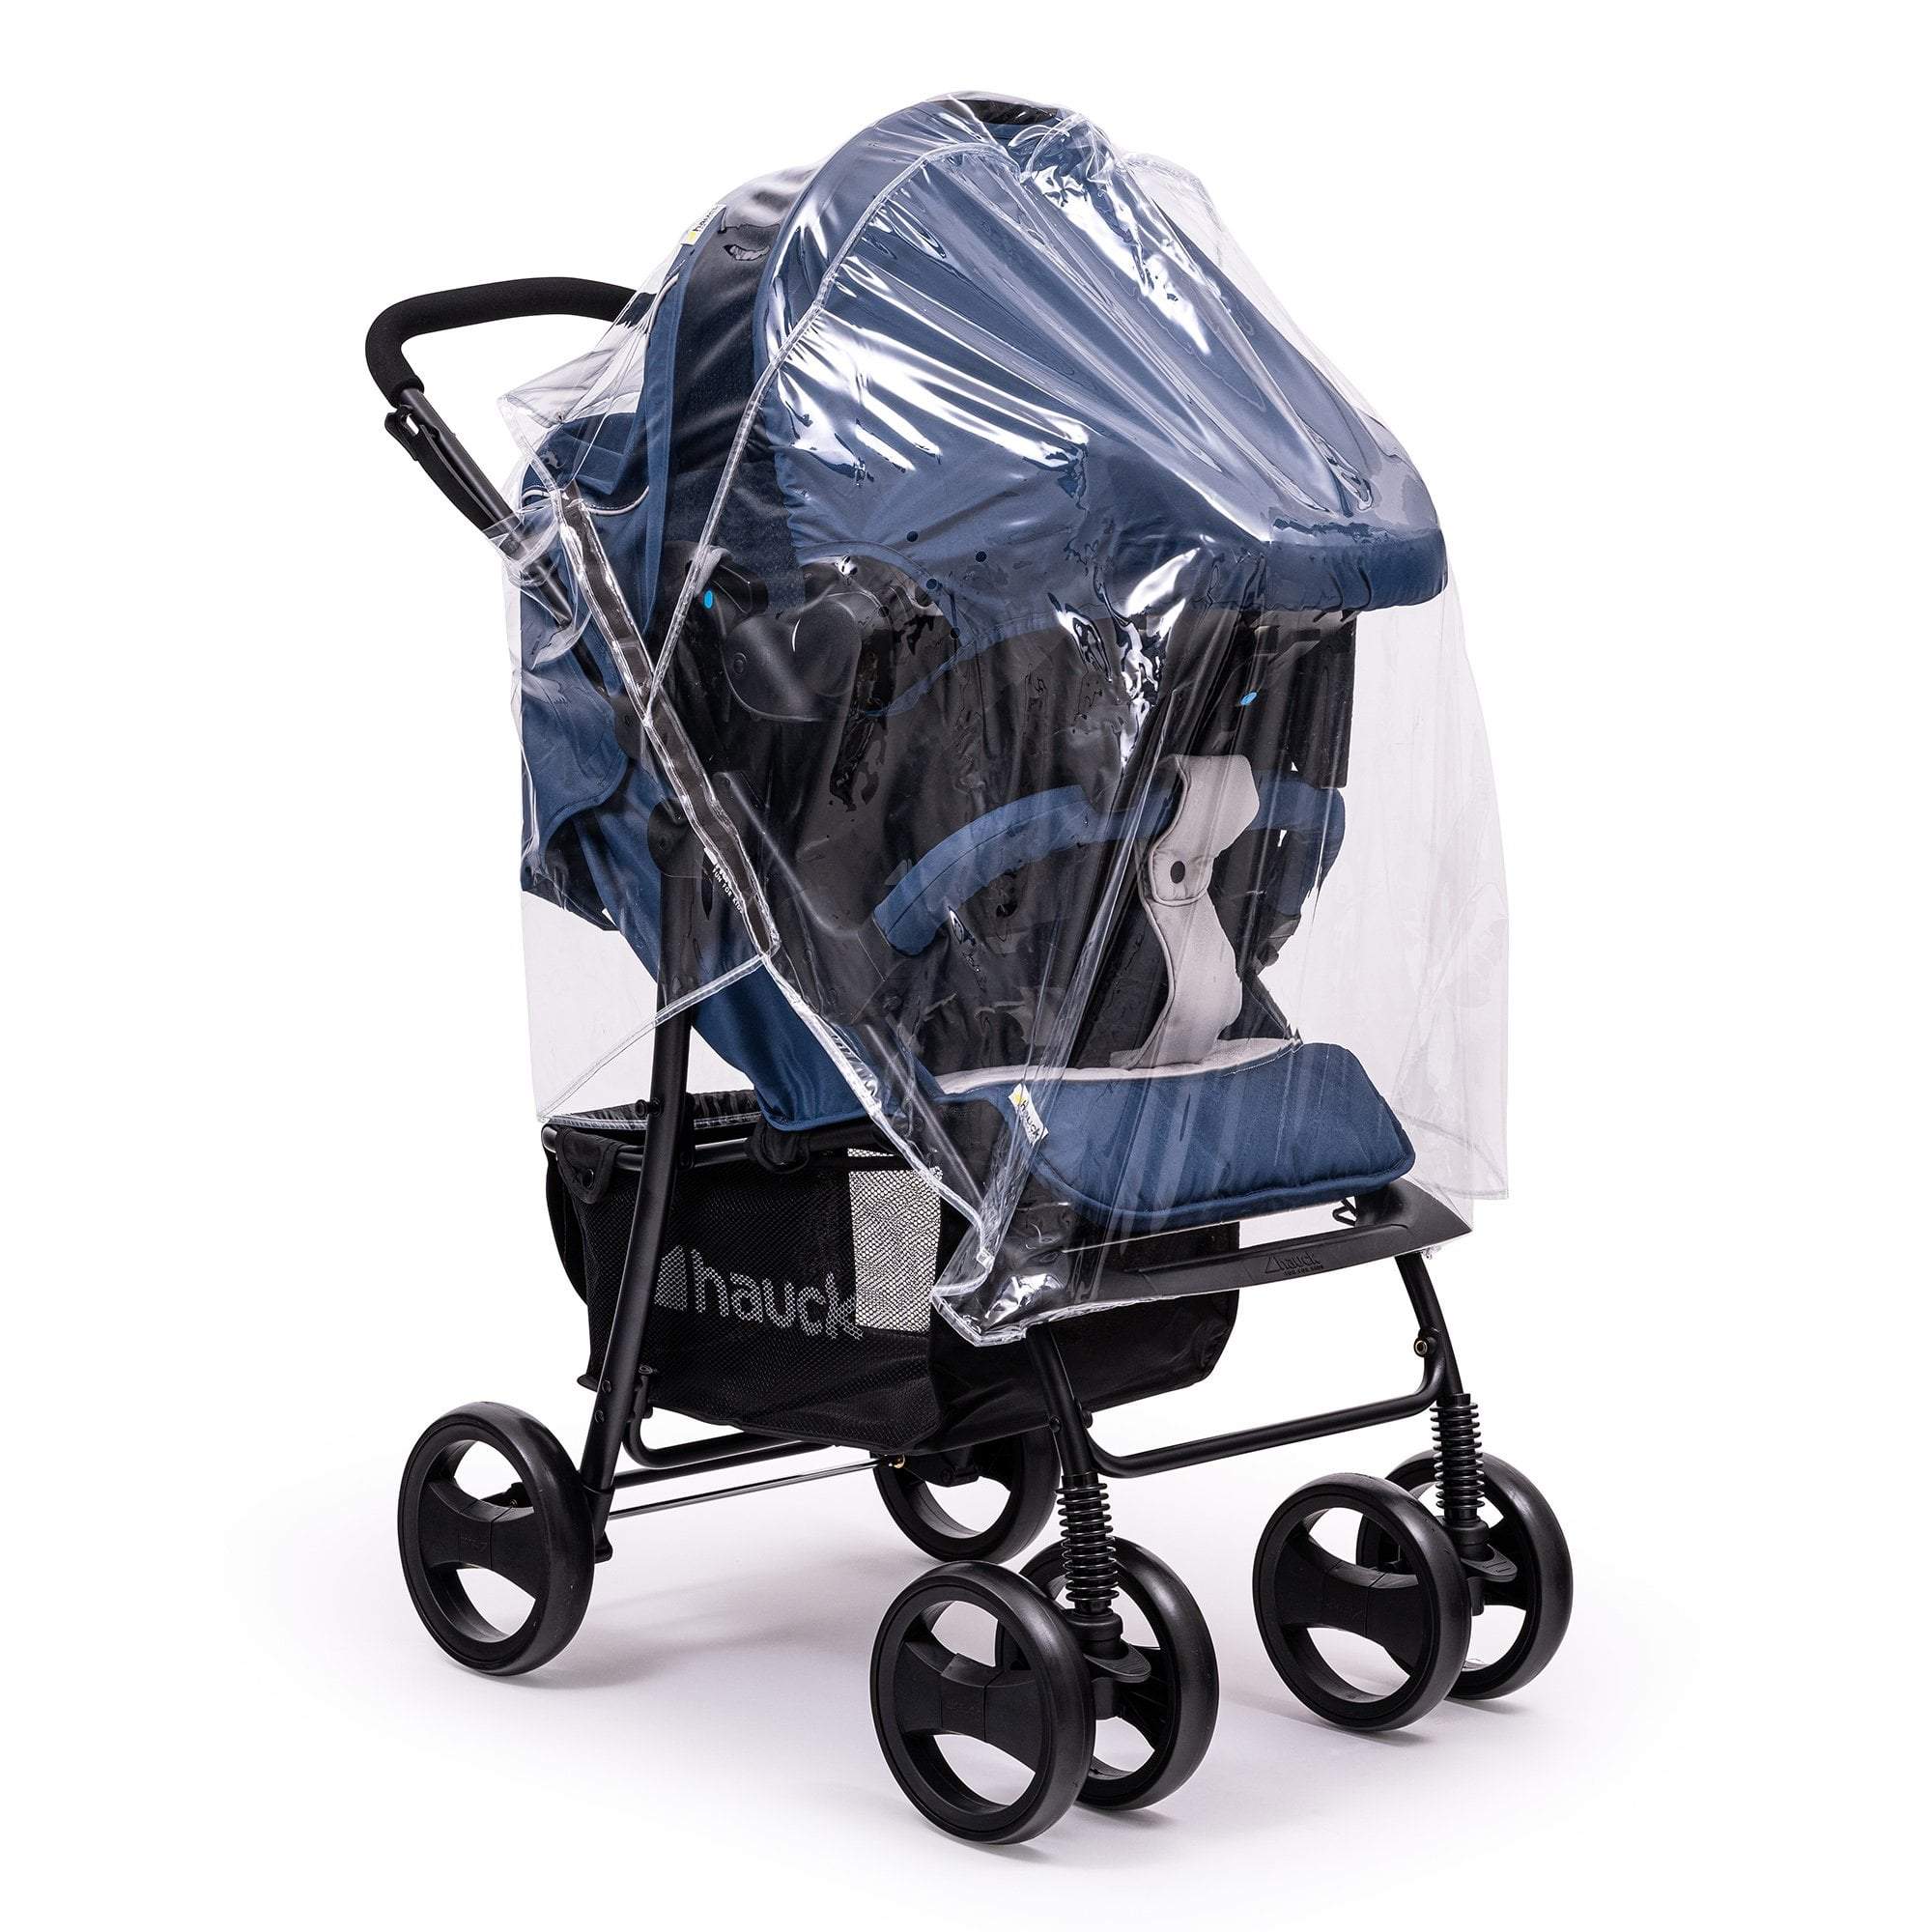 Travel System Raincover Compatible with Hauck - Fits All Models -  | For Your Little One